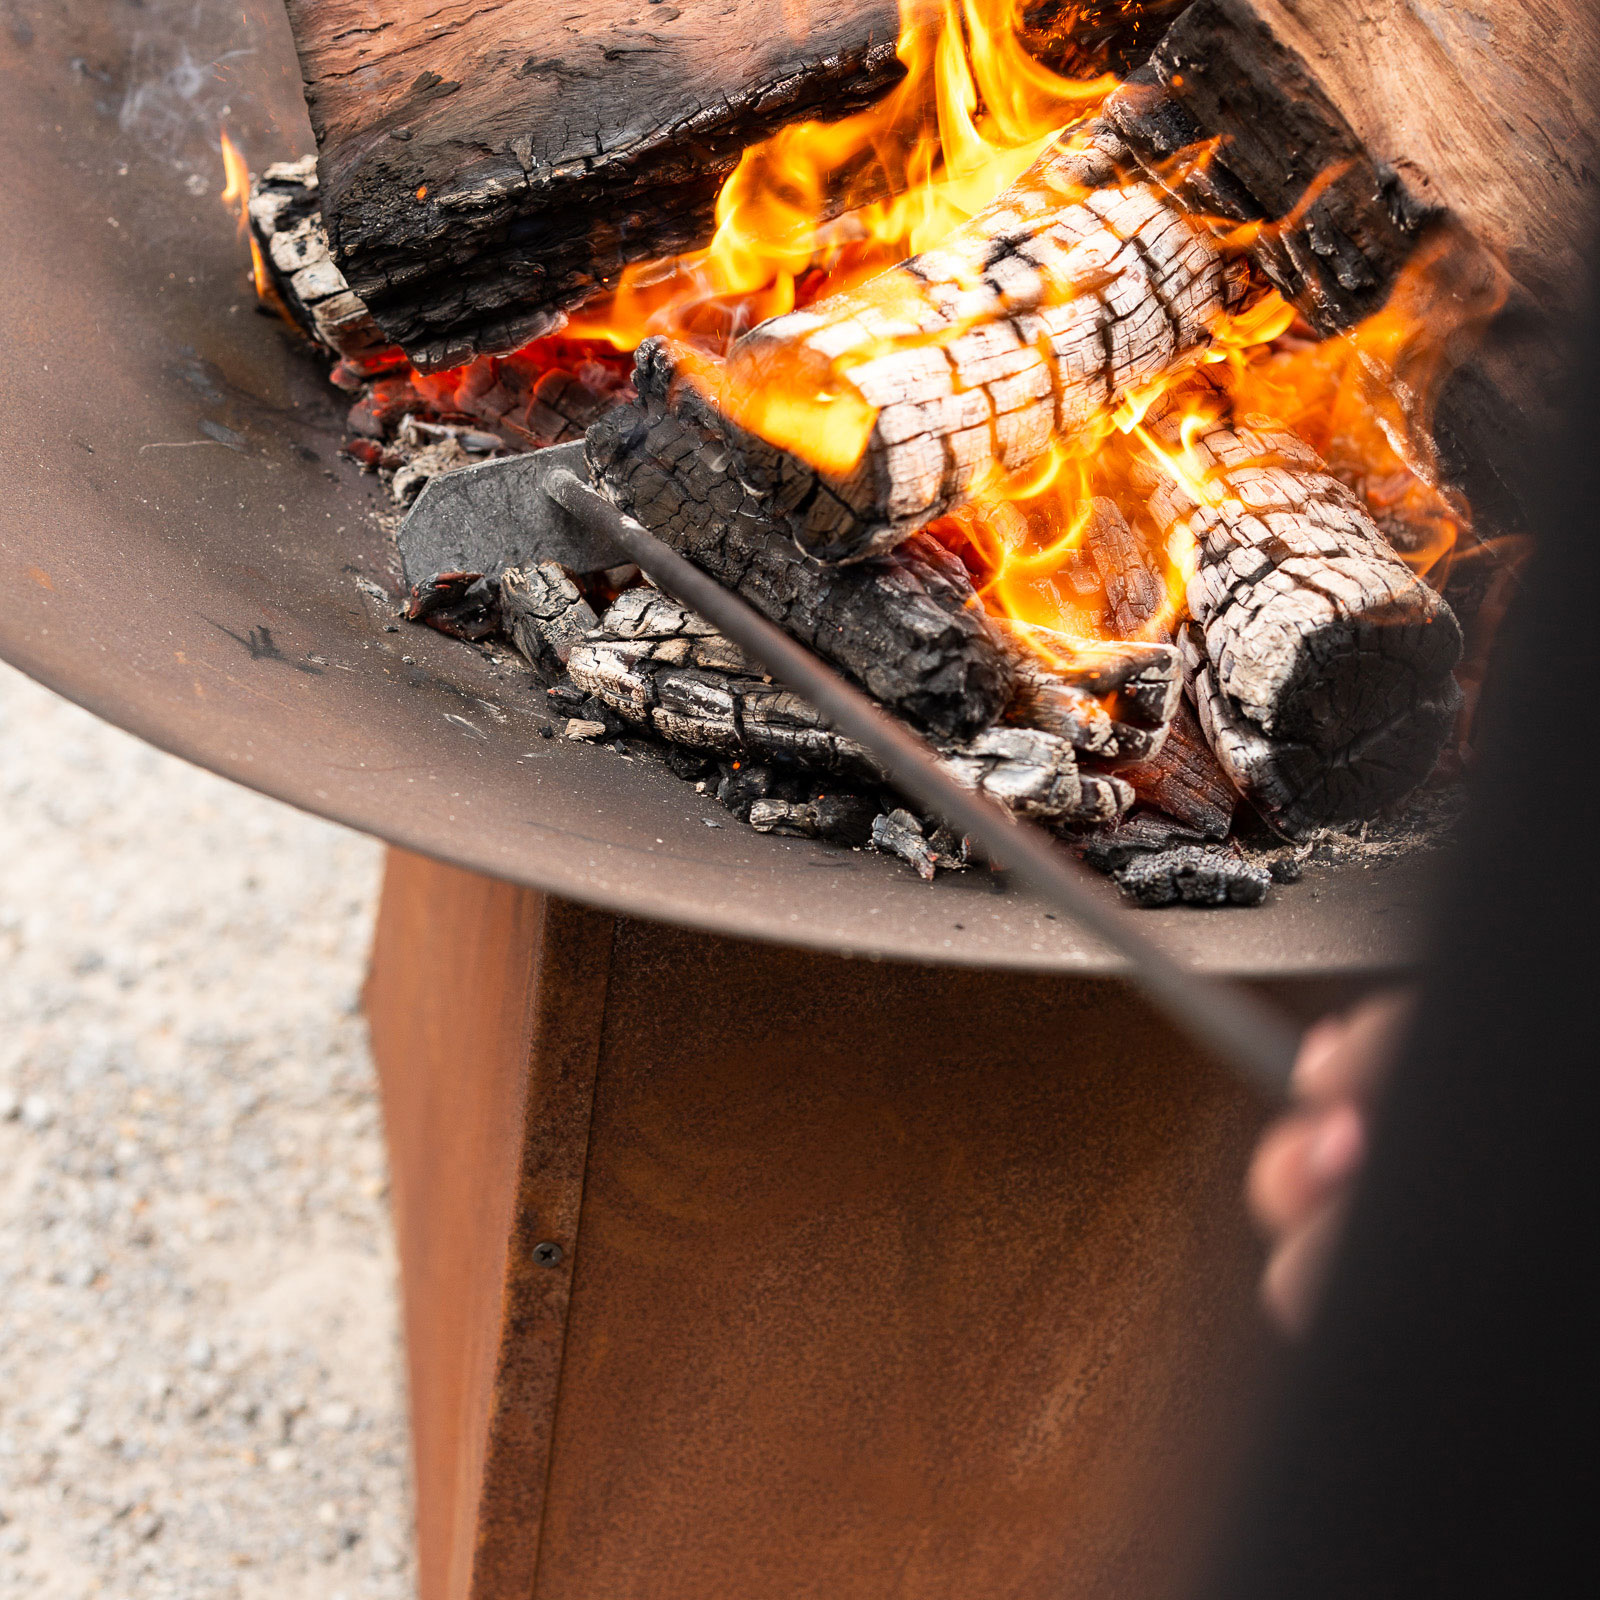 Top 10 Fire Pit Tips And Tricks Glow, How To Get Rid Of Ashes From A Fire Pit